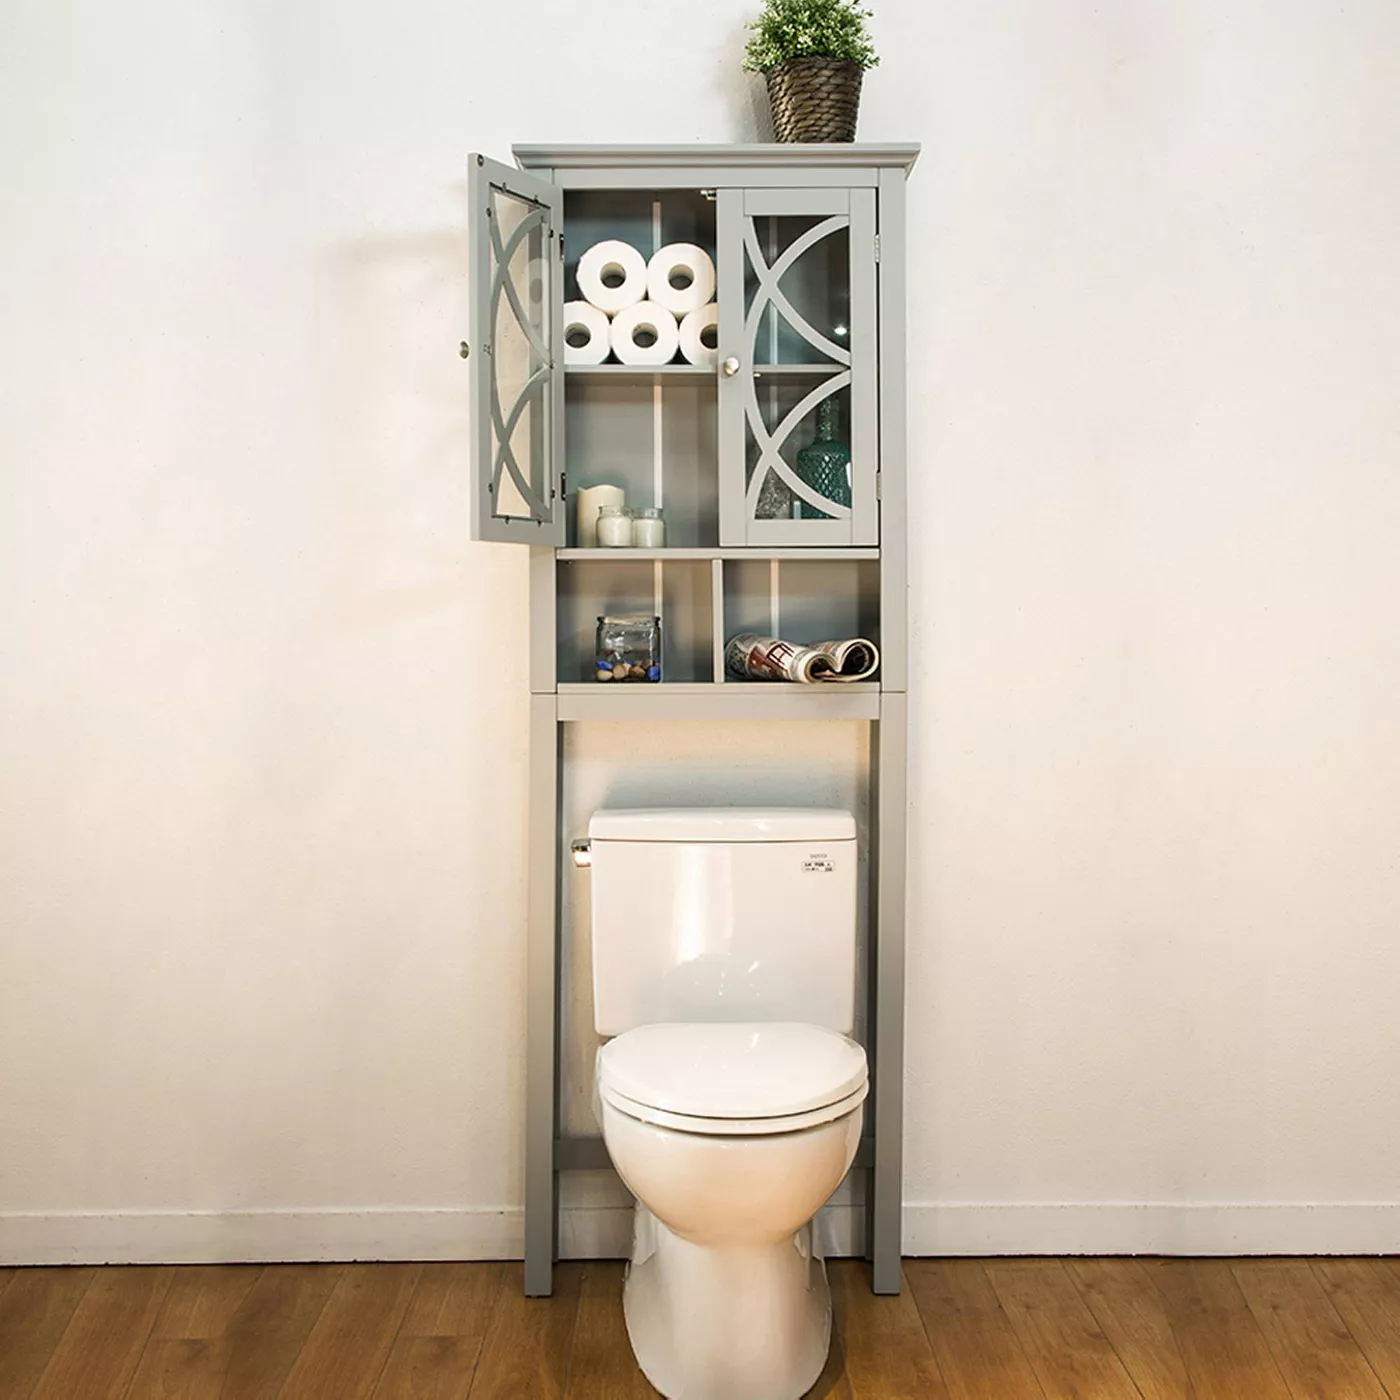 How to add more storage space to your small bathroom: 8 Functional, decorative and budget-friendly wall and storage shelves.